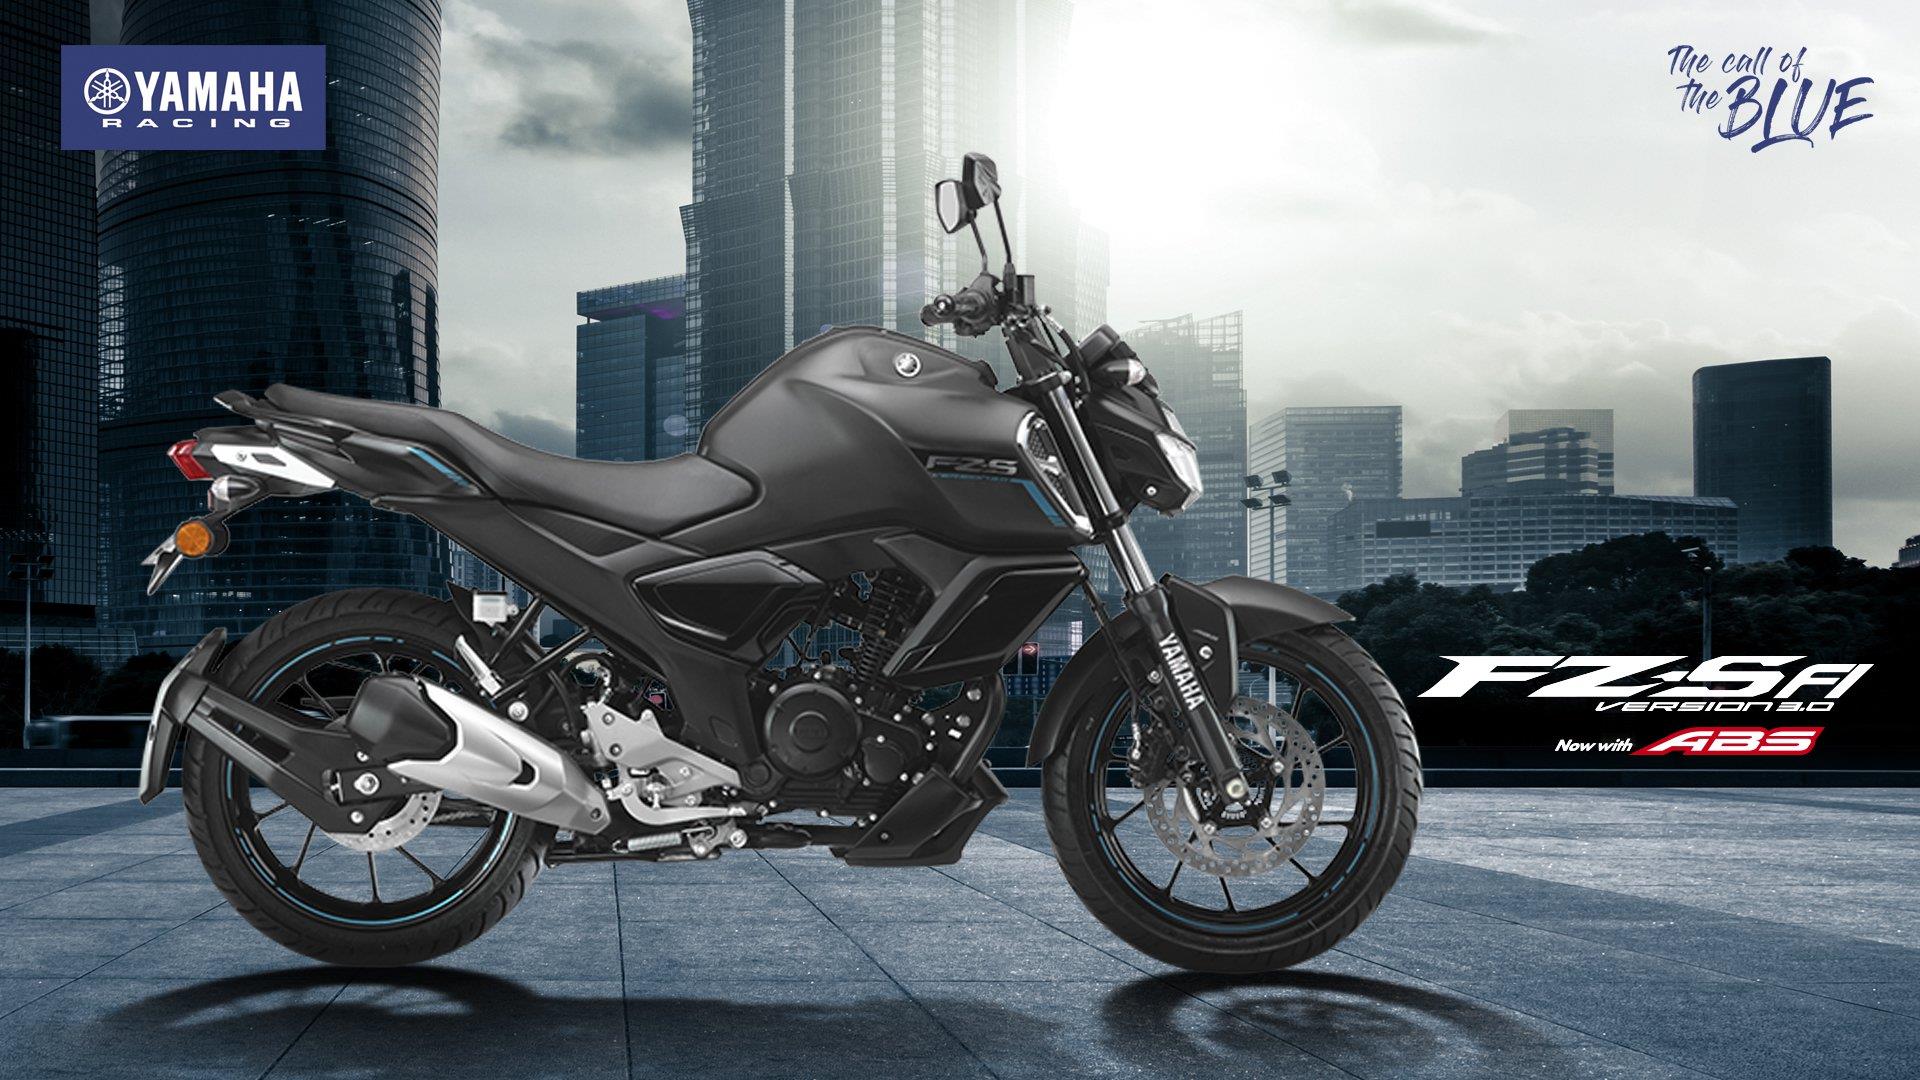 2021 Yamaha FZS V3 Price in India, BS6 Mileage & Top Speed